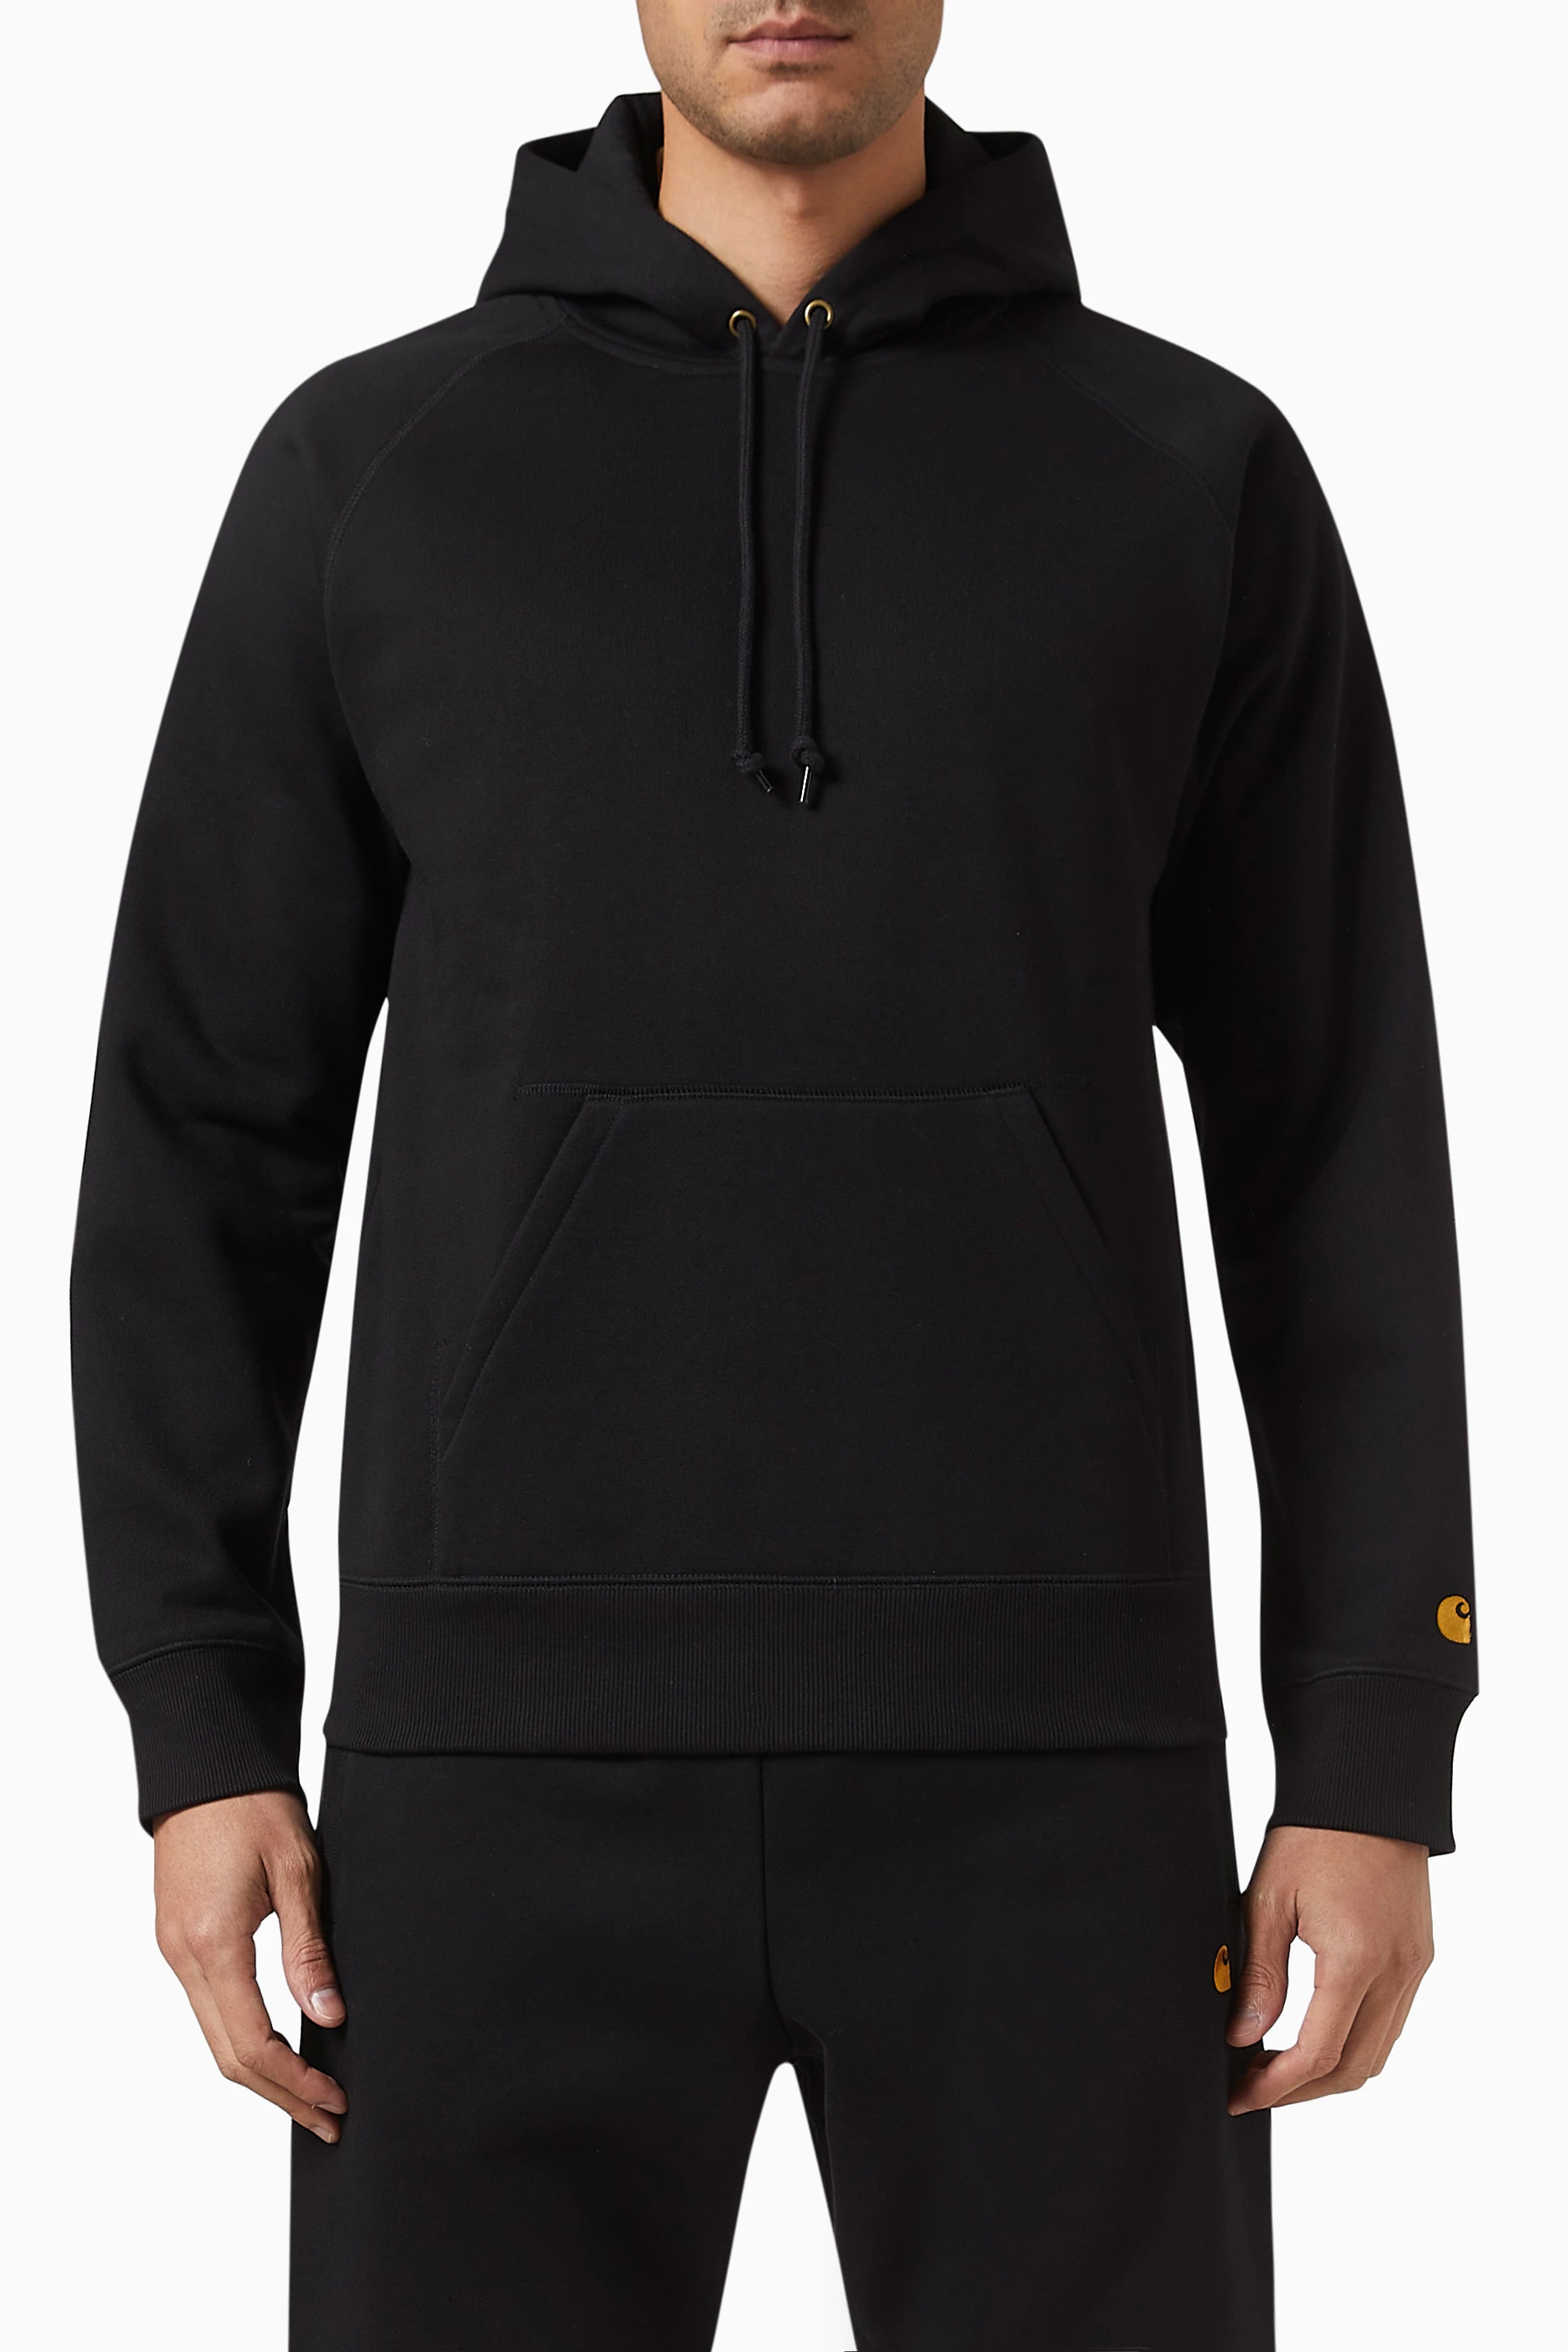 CARHARTT WIP Chase Logo-Embroidered Cotton-Blend Jersey Hoodie for Men